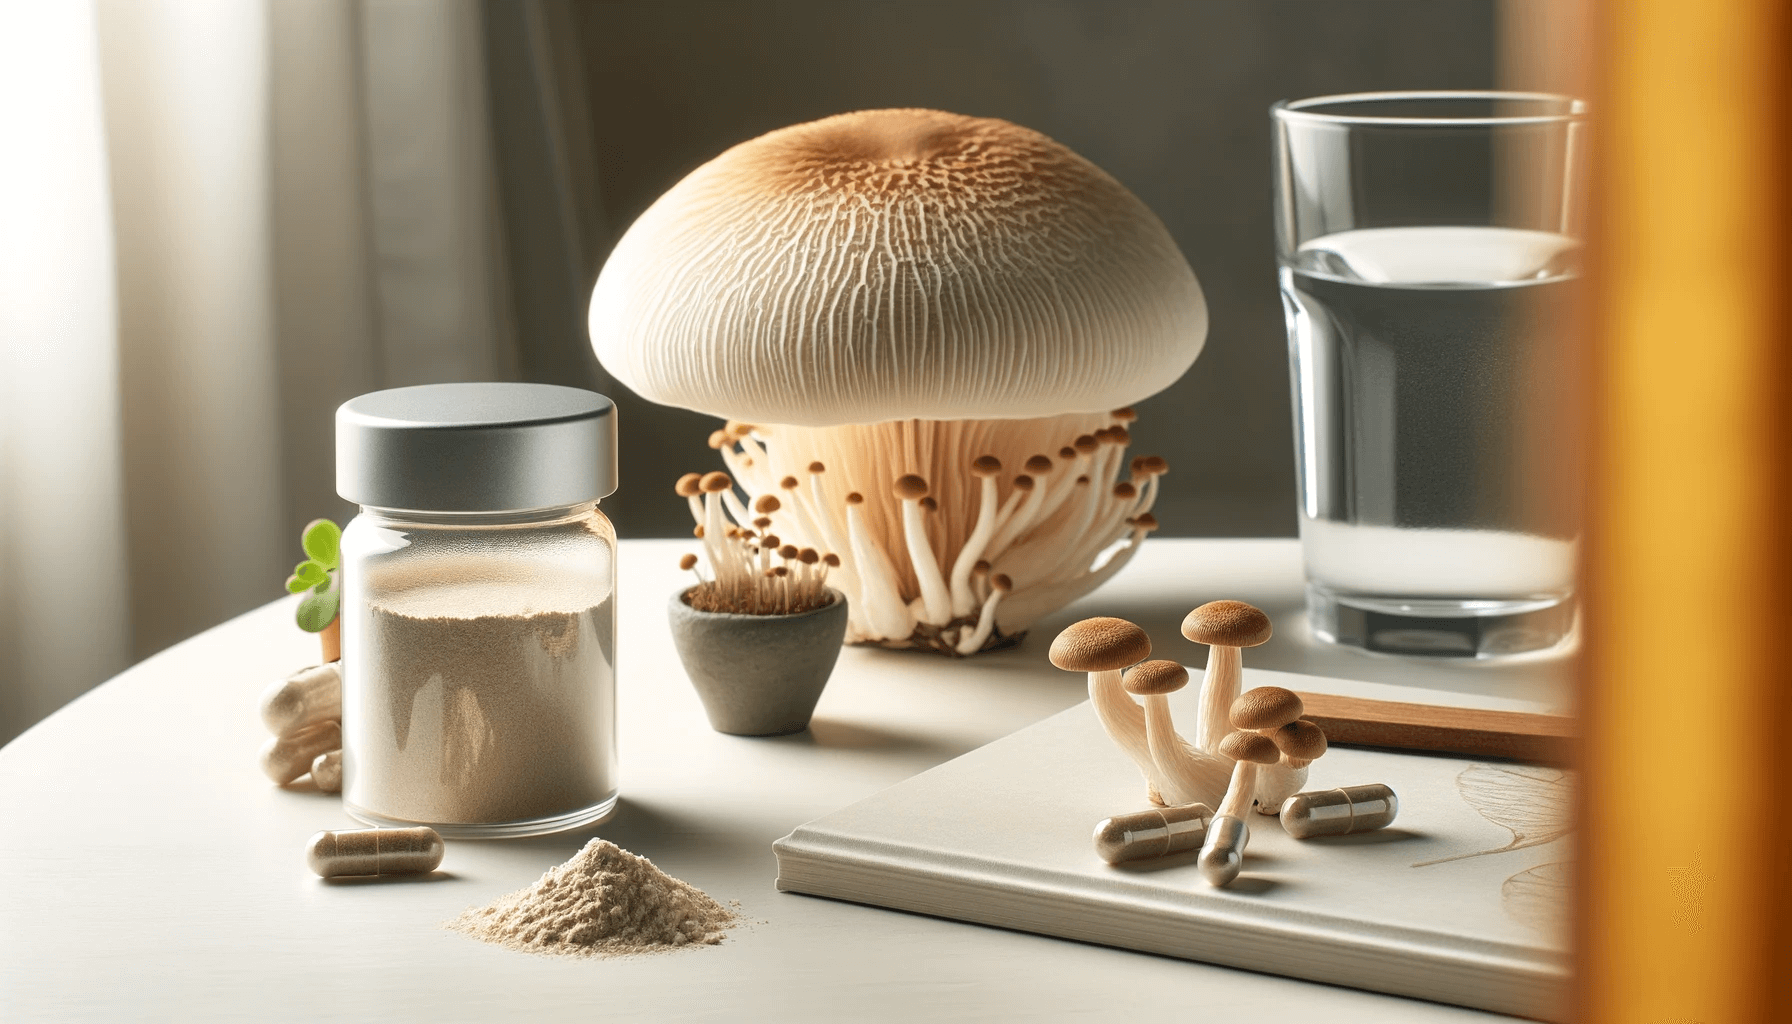 Lion's Mane mushroom capsule and powder displayed on a clean white surface with a glass of water. In the background, there's a small potted Lion's Mane mushroom plant.